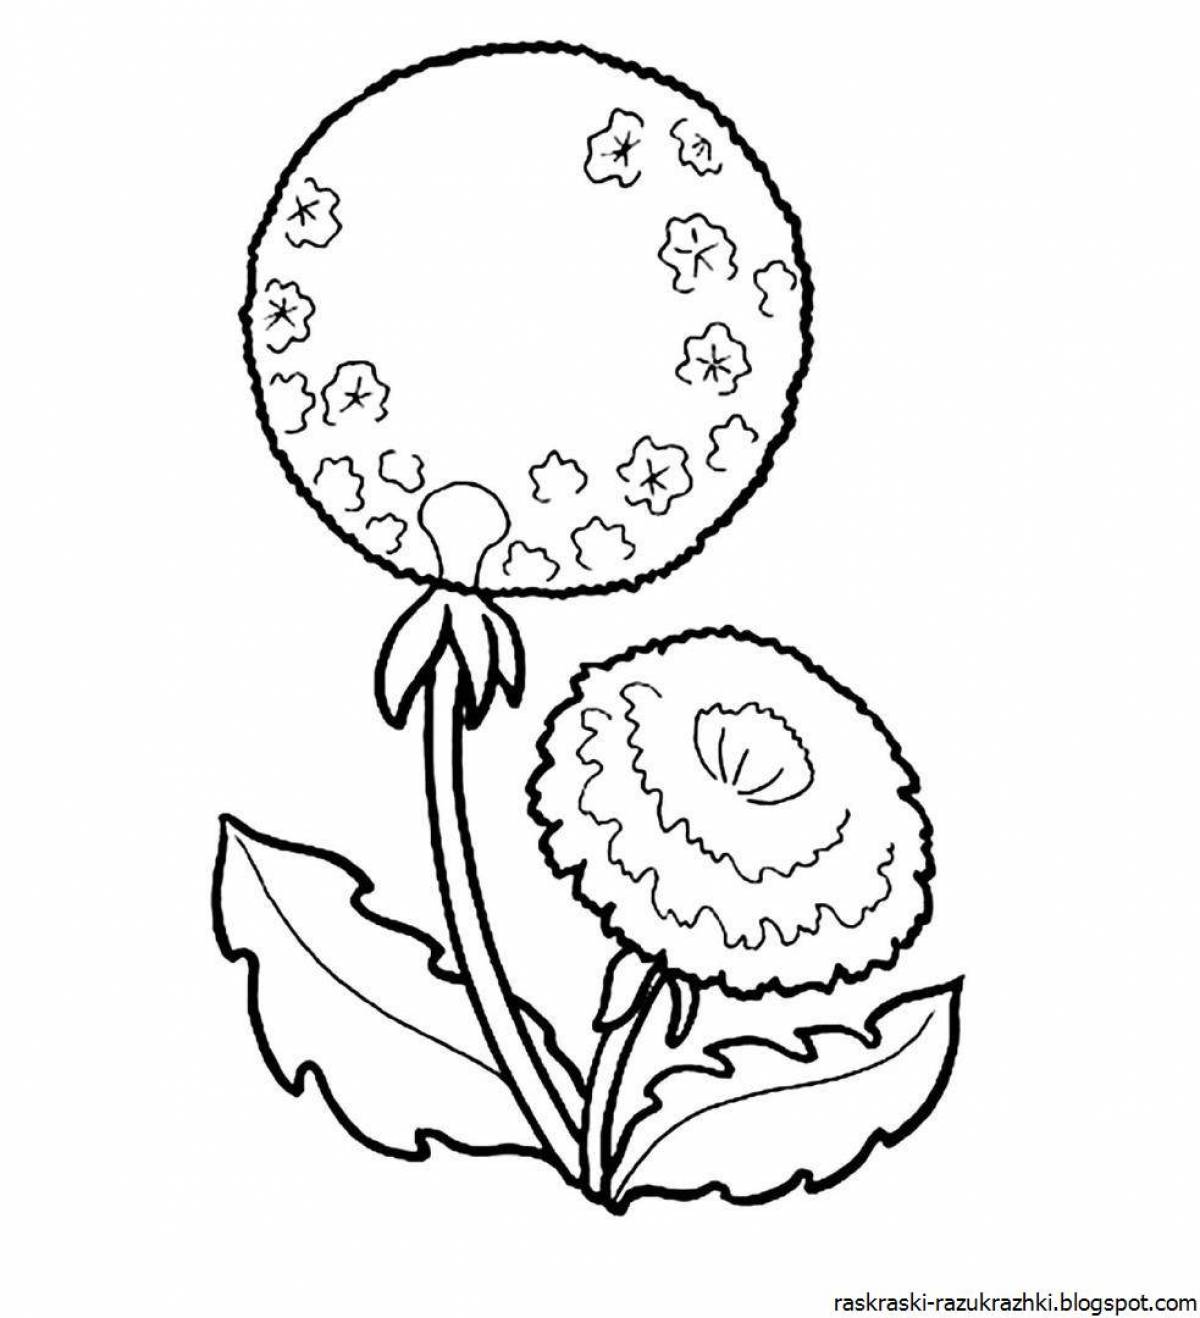 Glowing dandelion coloring page